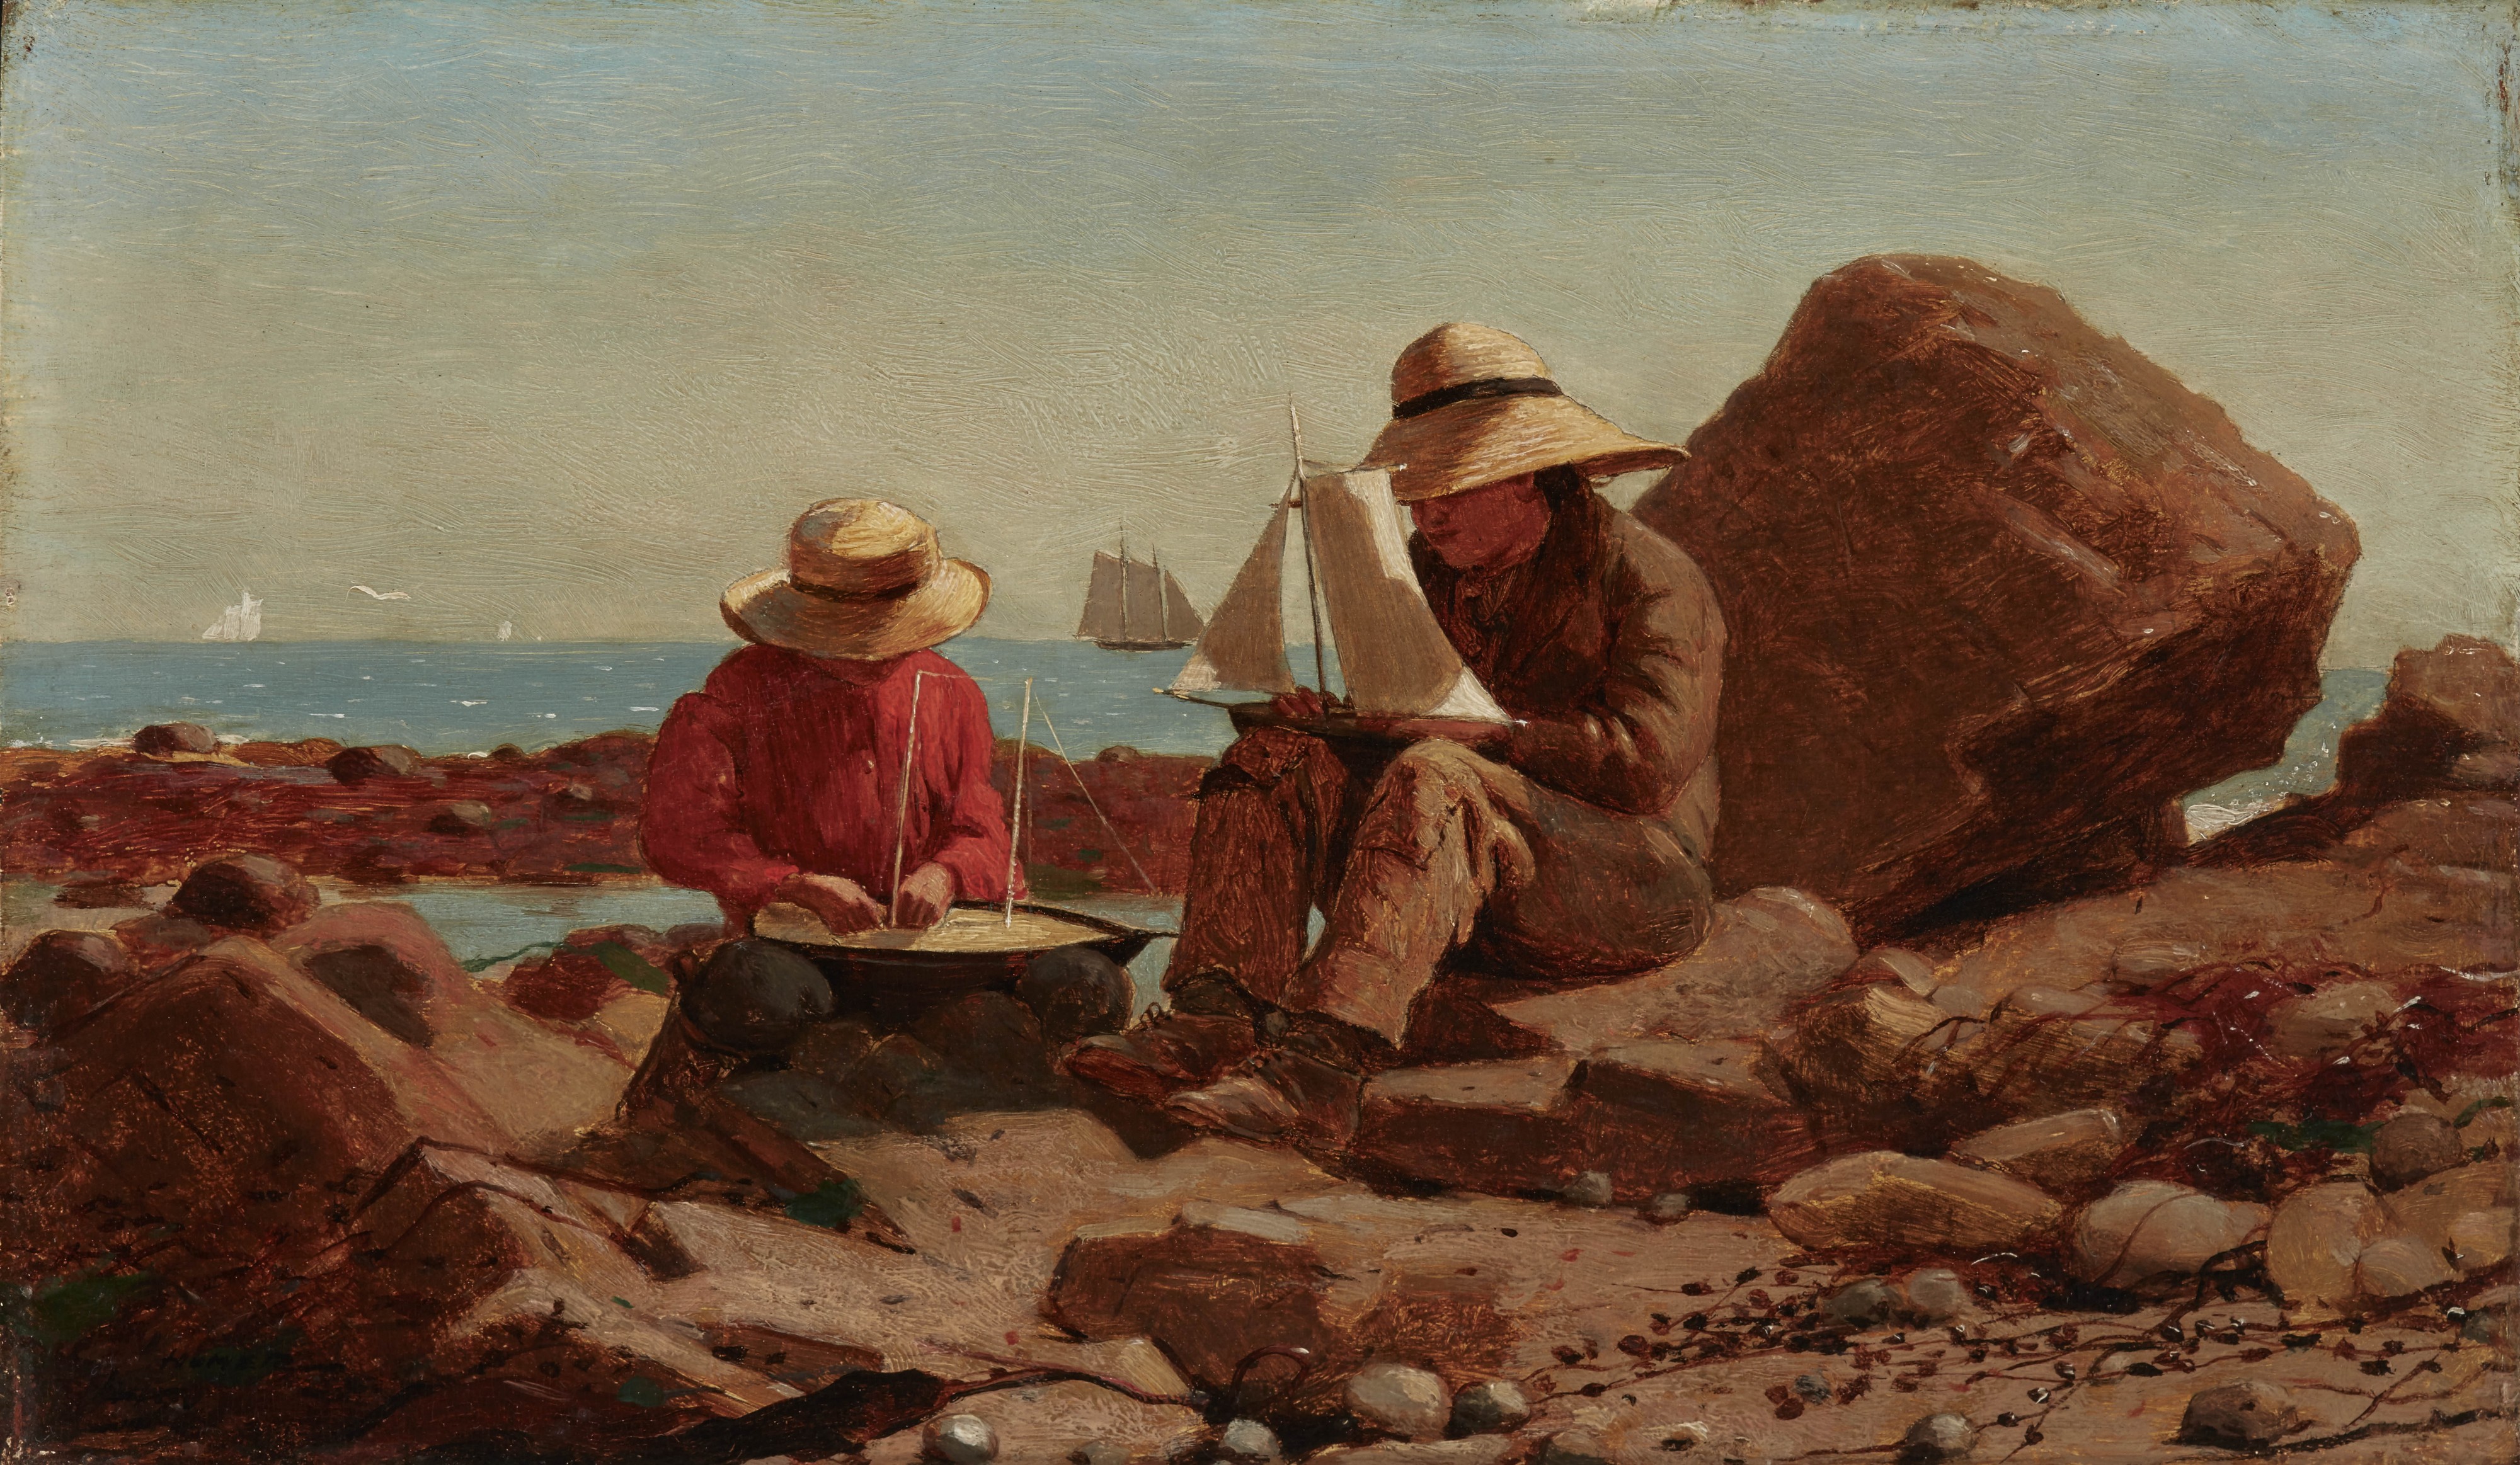 Winslow Homer - The Boat Builders, 1873 (Indianapolis Museum of Art)